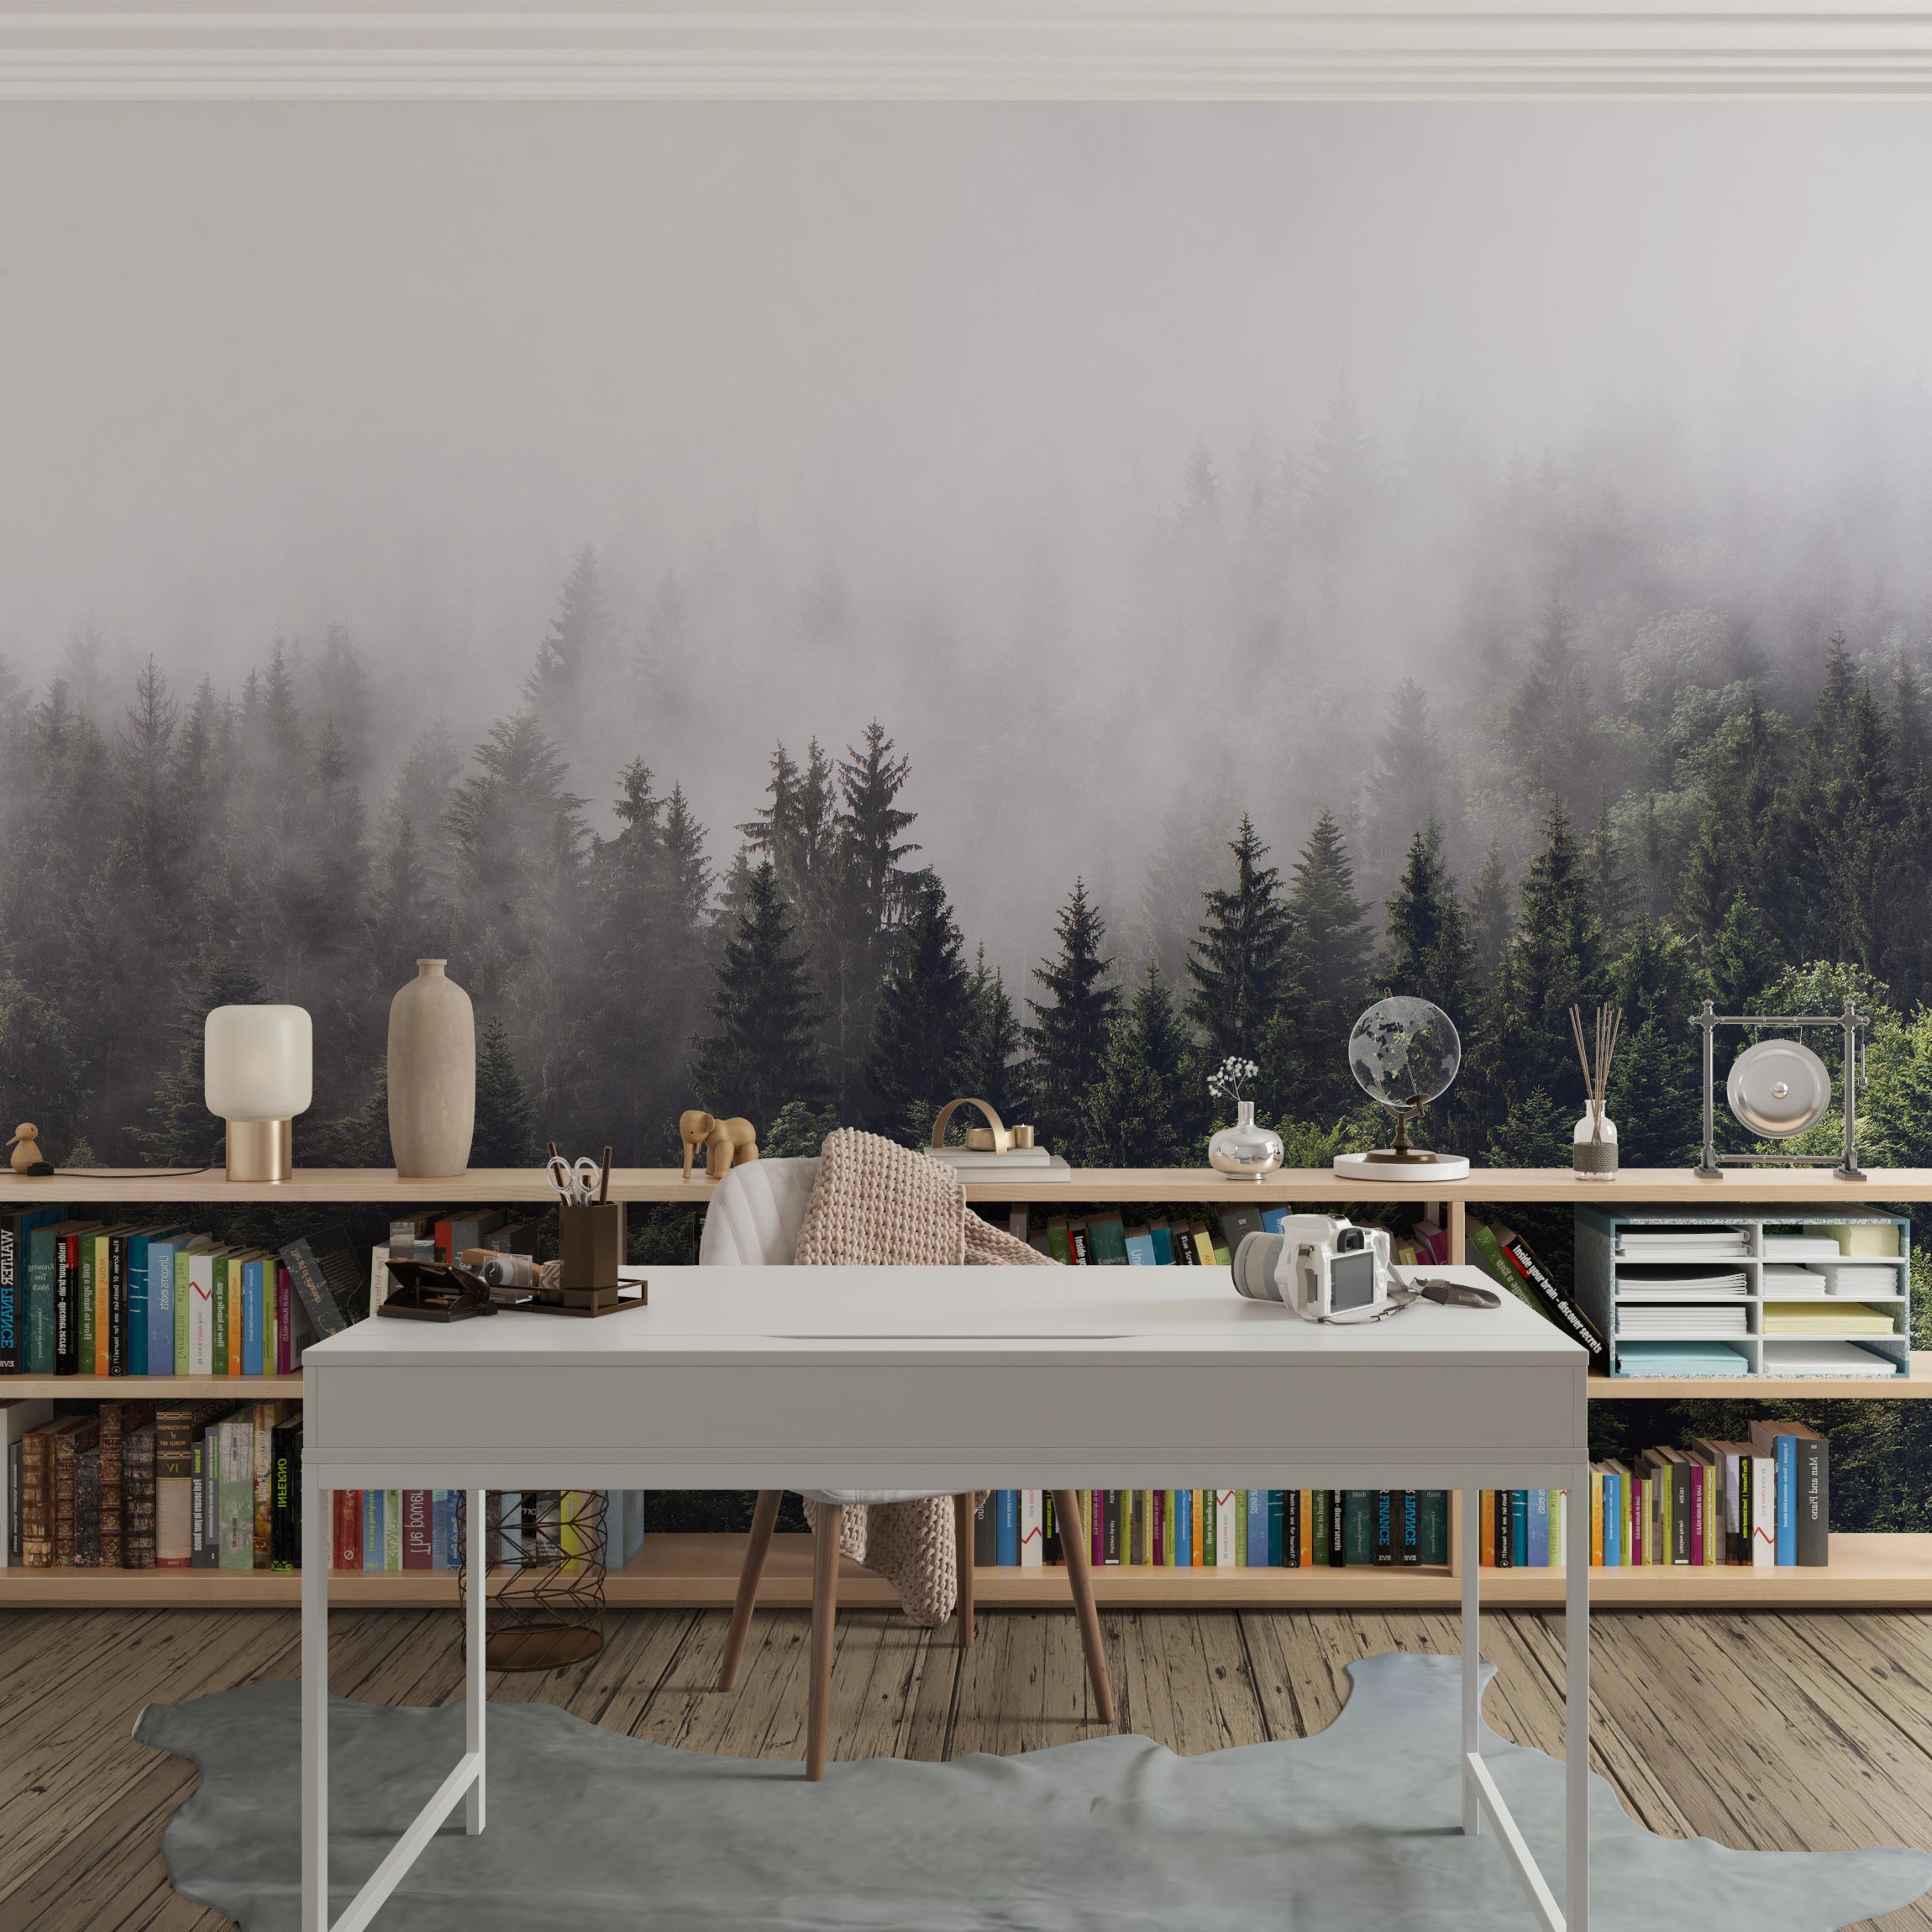 files/A-peel-and-stick-wallpaper-mural-depicting-a-foggy-forest.-The-forest-is-a-backdrop-for-a-desk-and-chair.-The-fog-provides-a-sense-of-focus-and-concentration.jpg